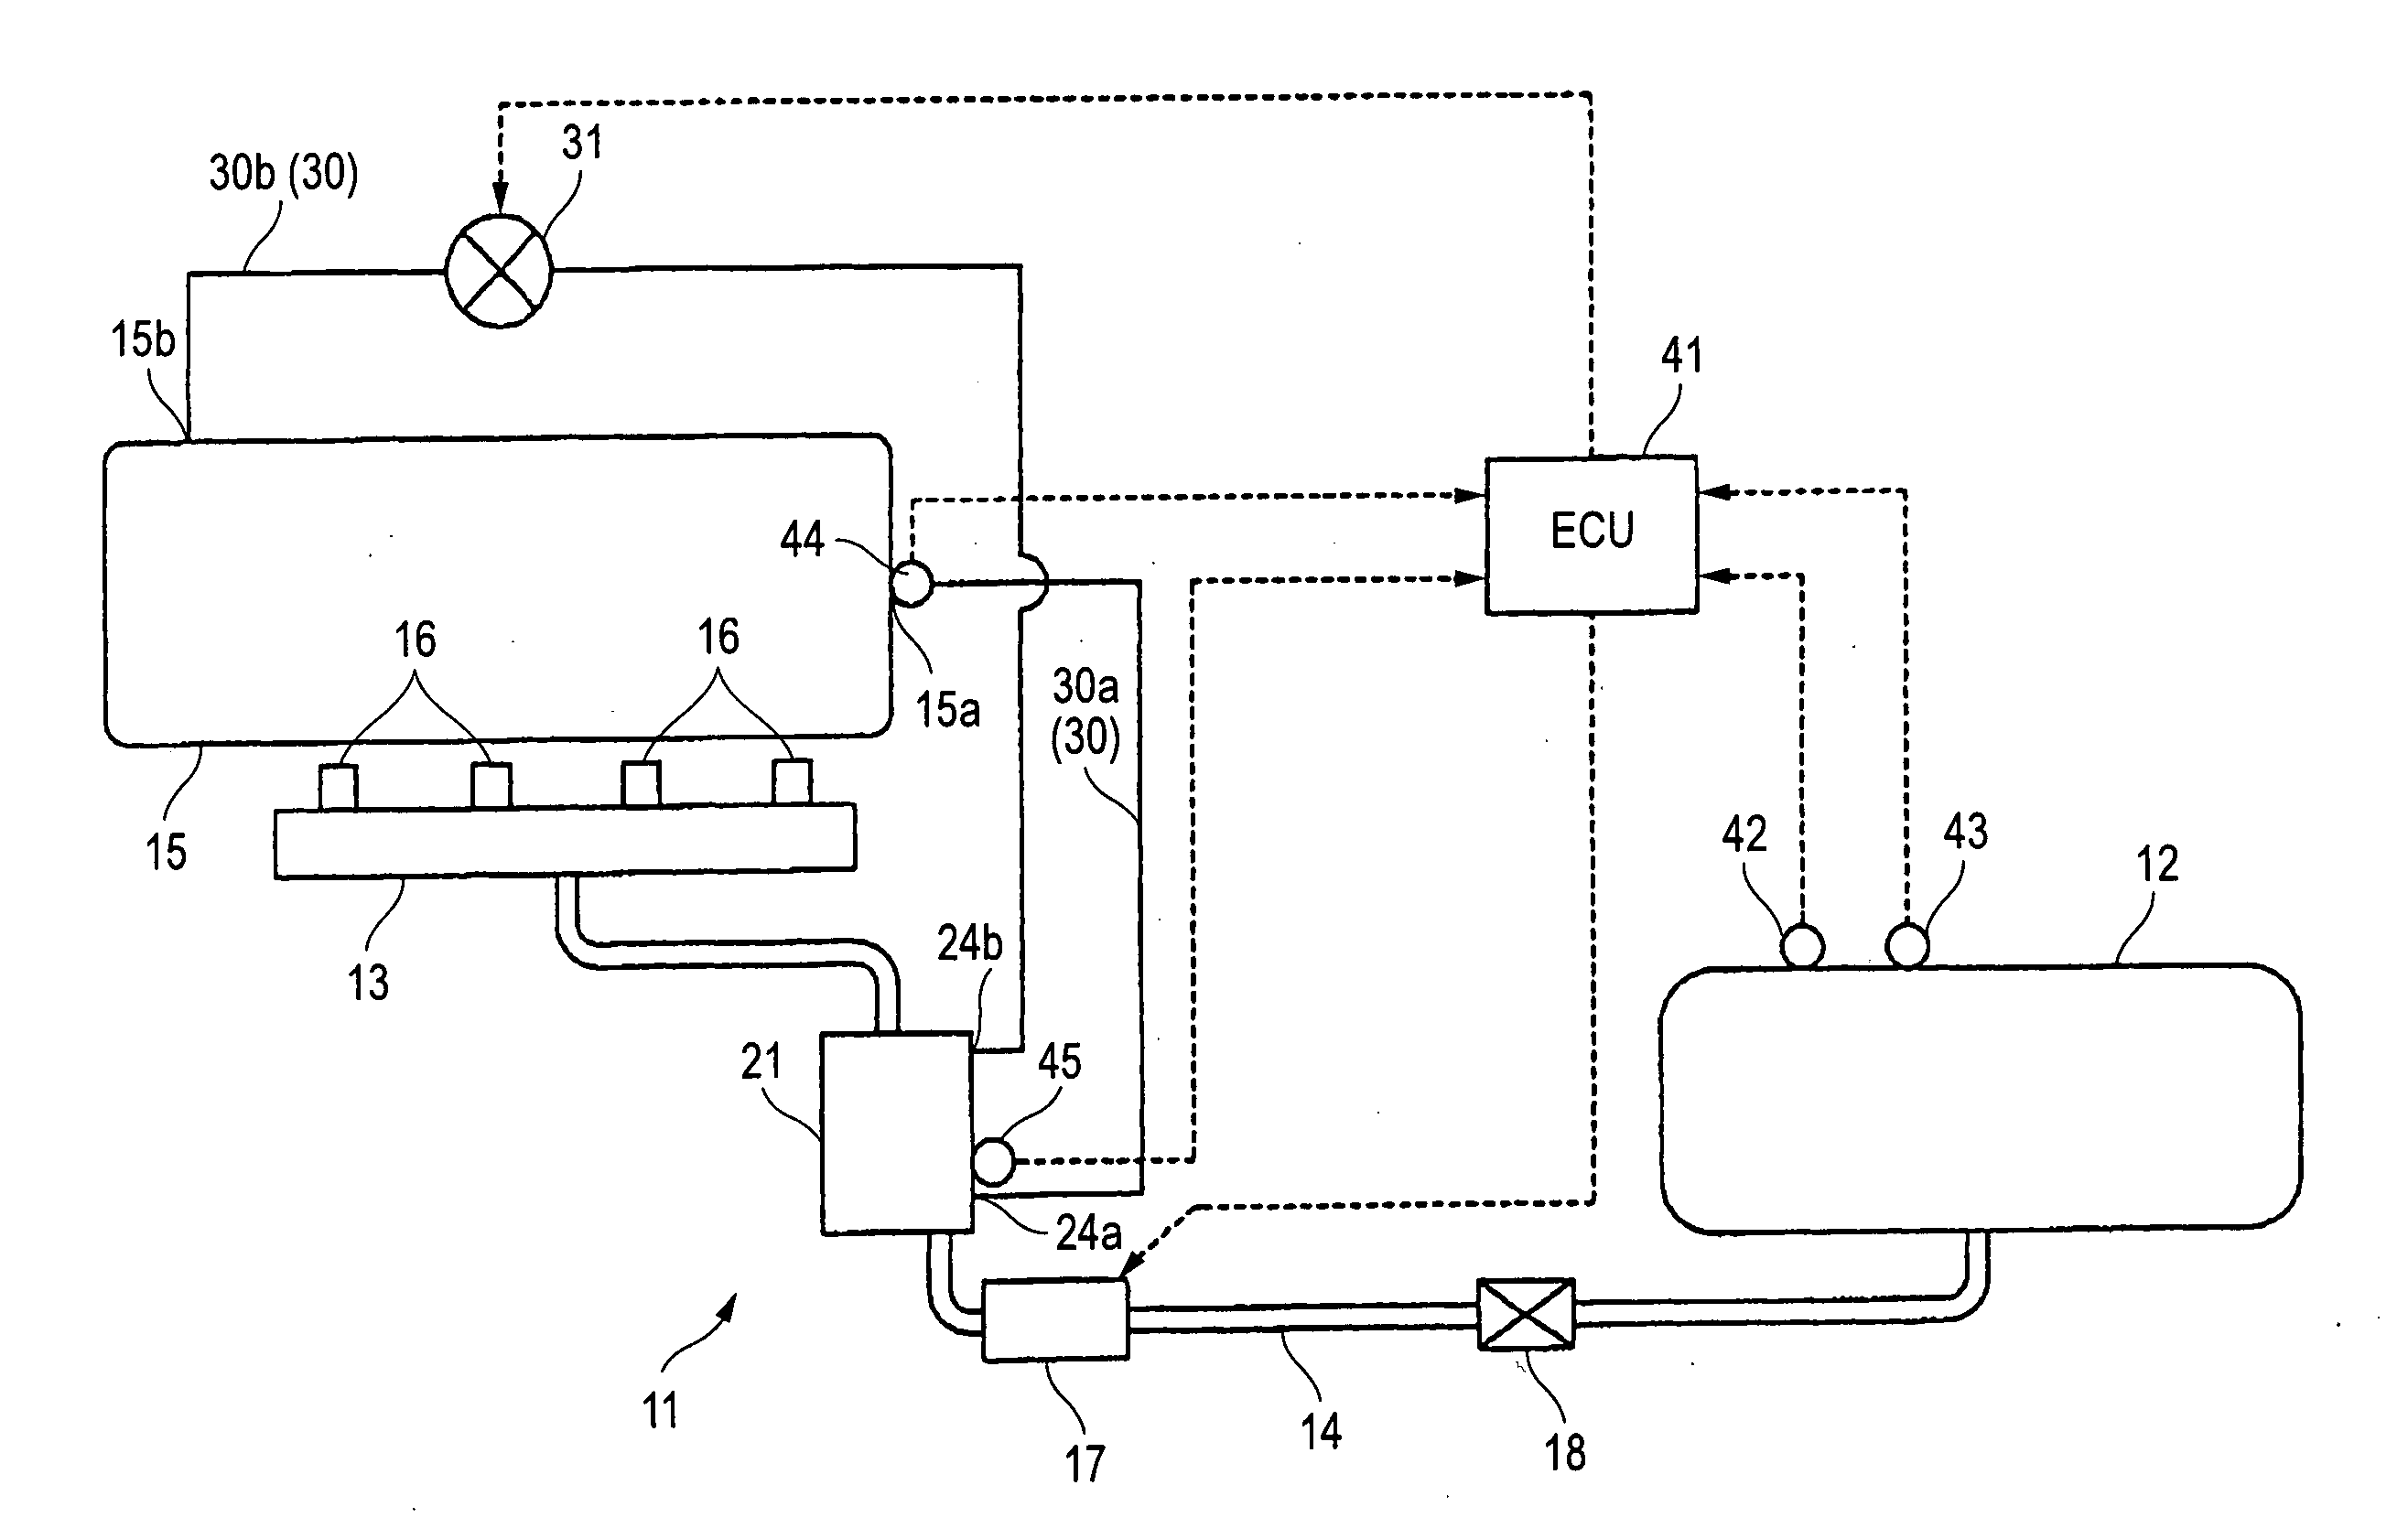 Heating apparatus for liquefied gas fuel supply system